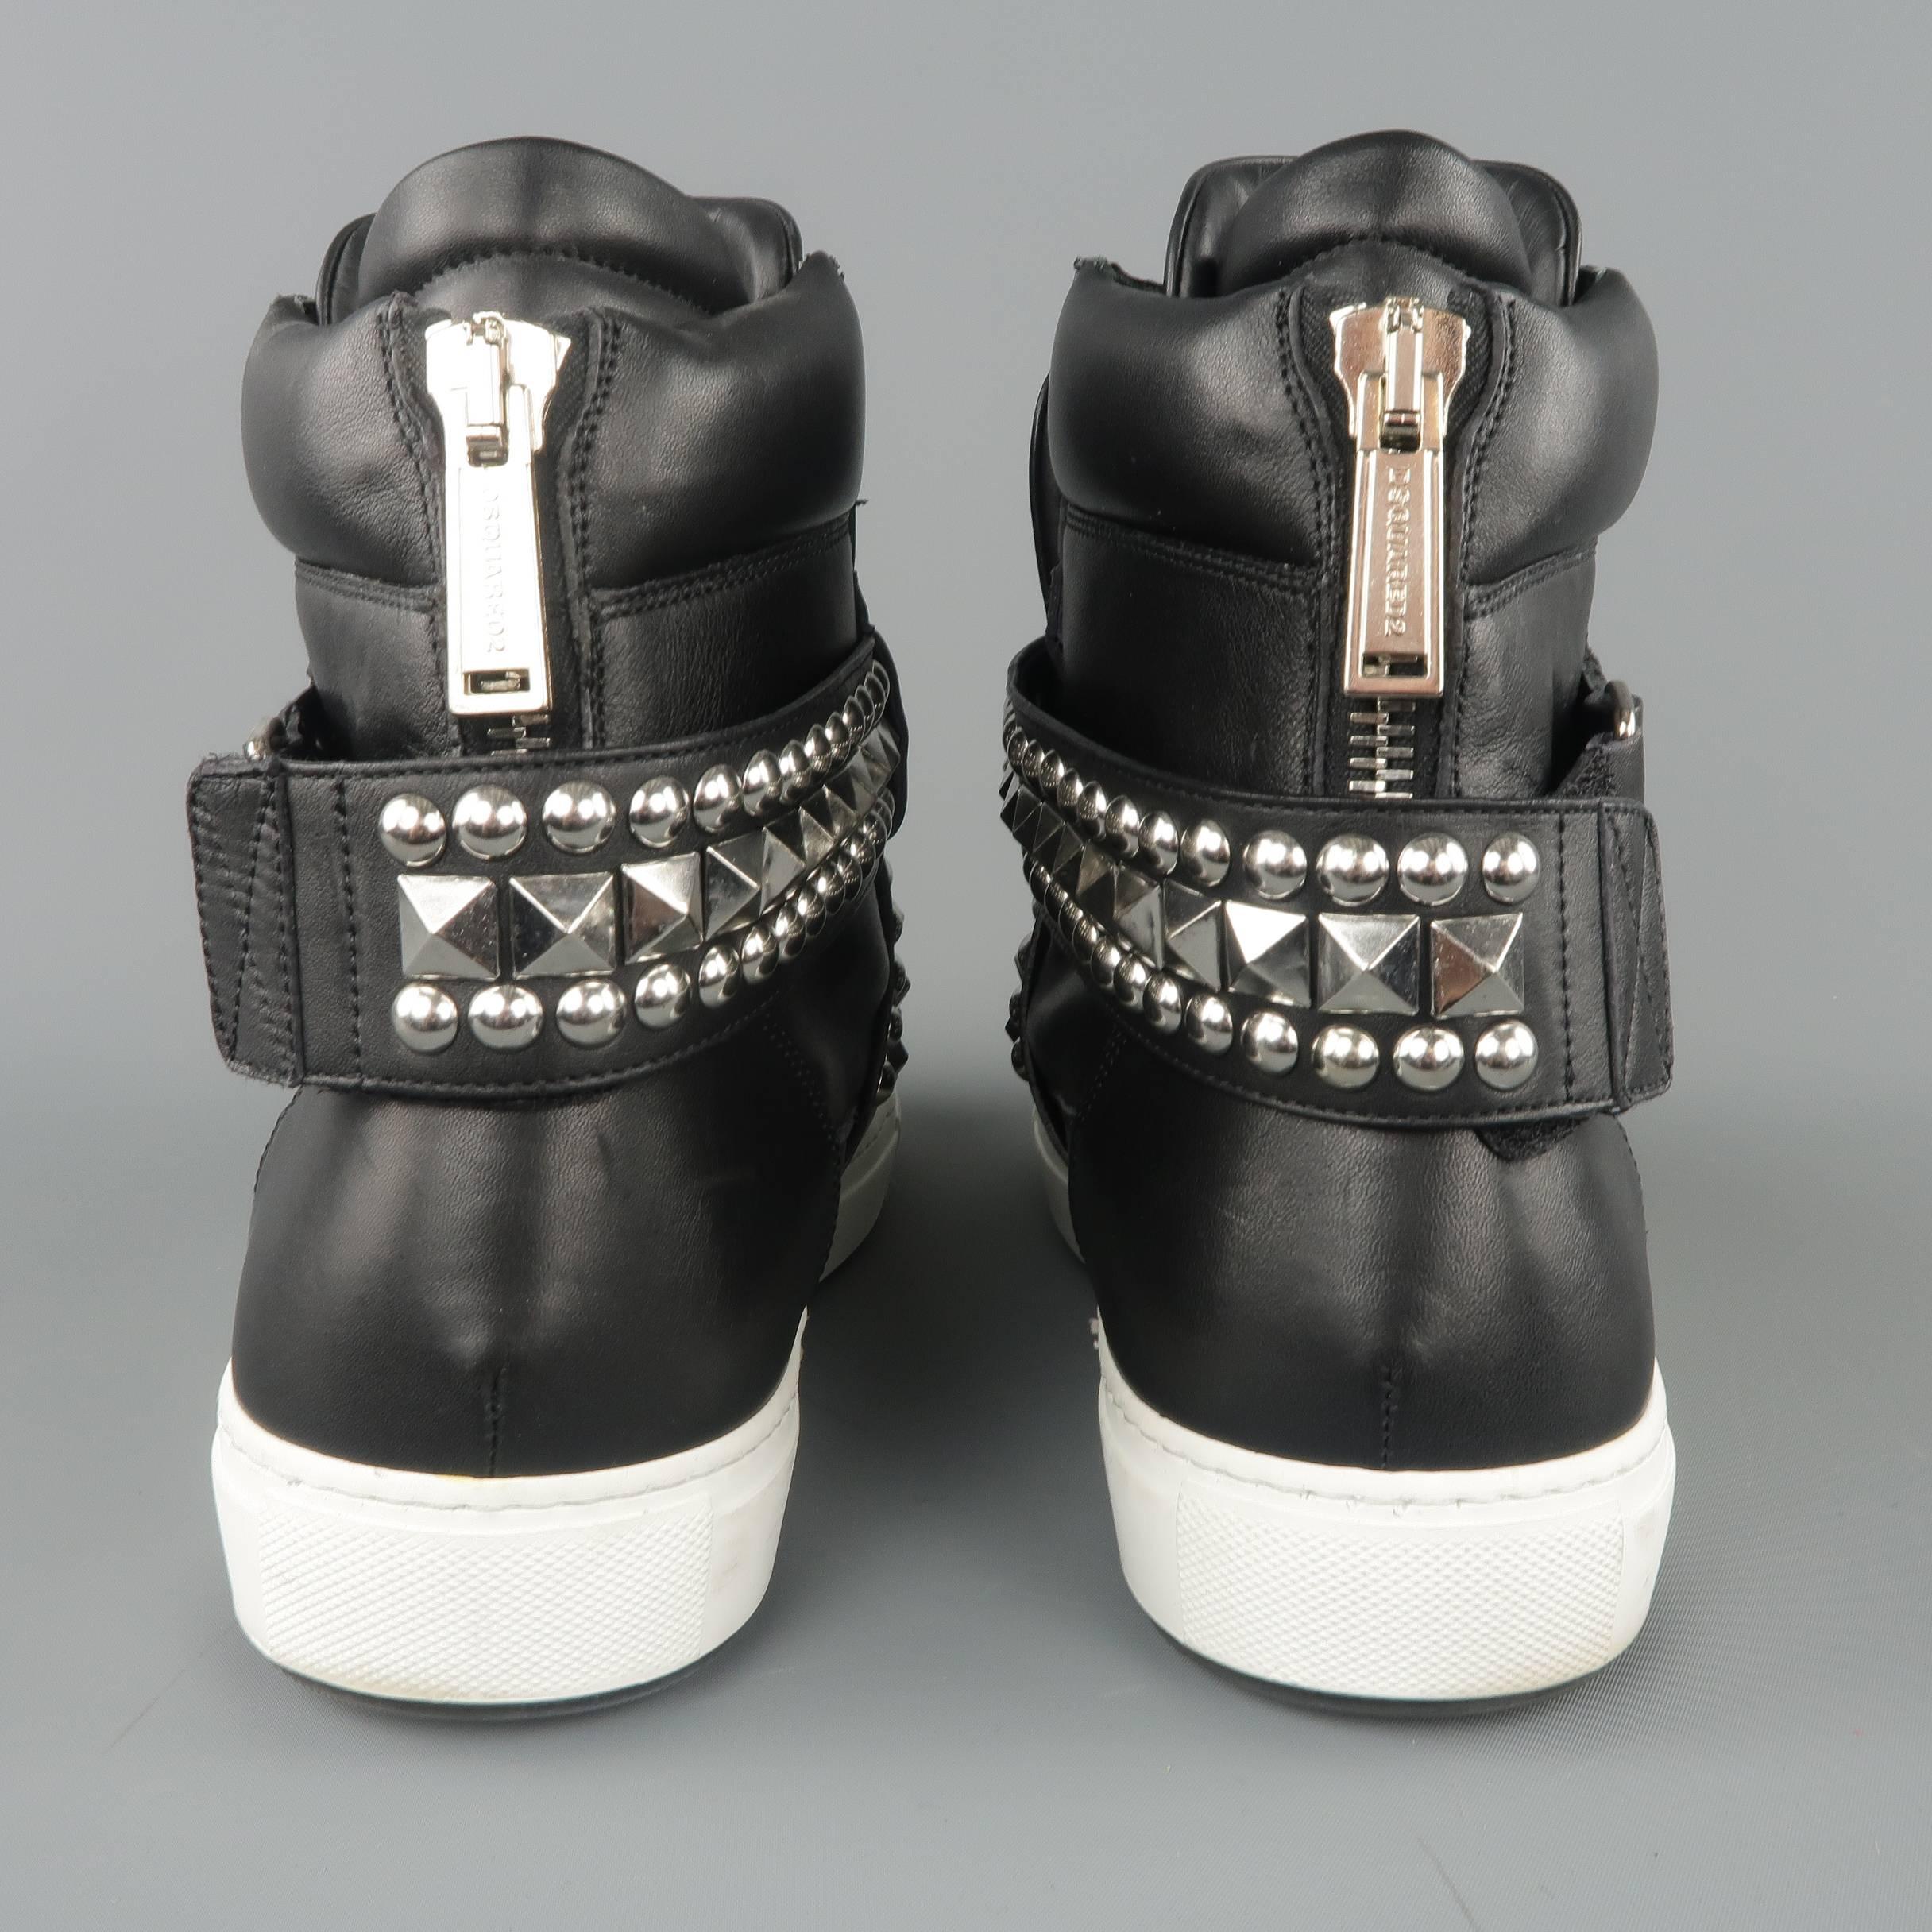 DSQUARED2 Sneakers -  9.5 Black Silver Studded Leather High Top 2